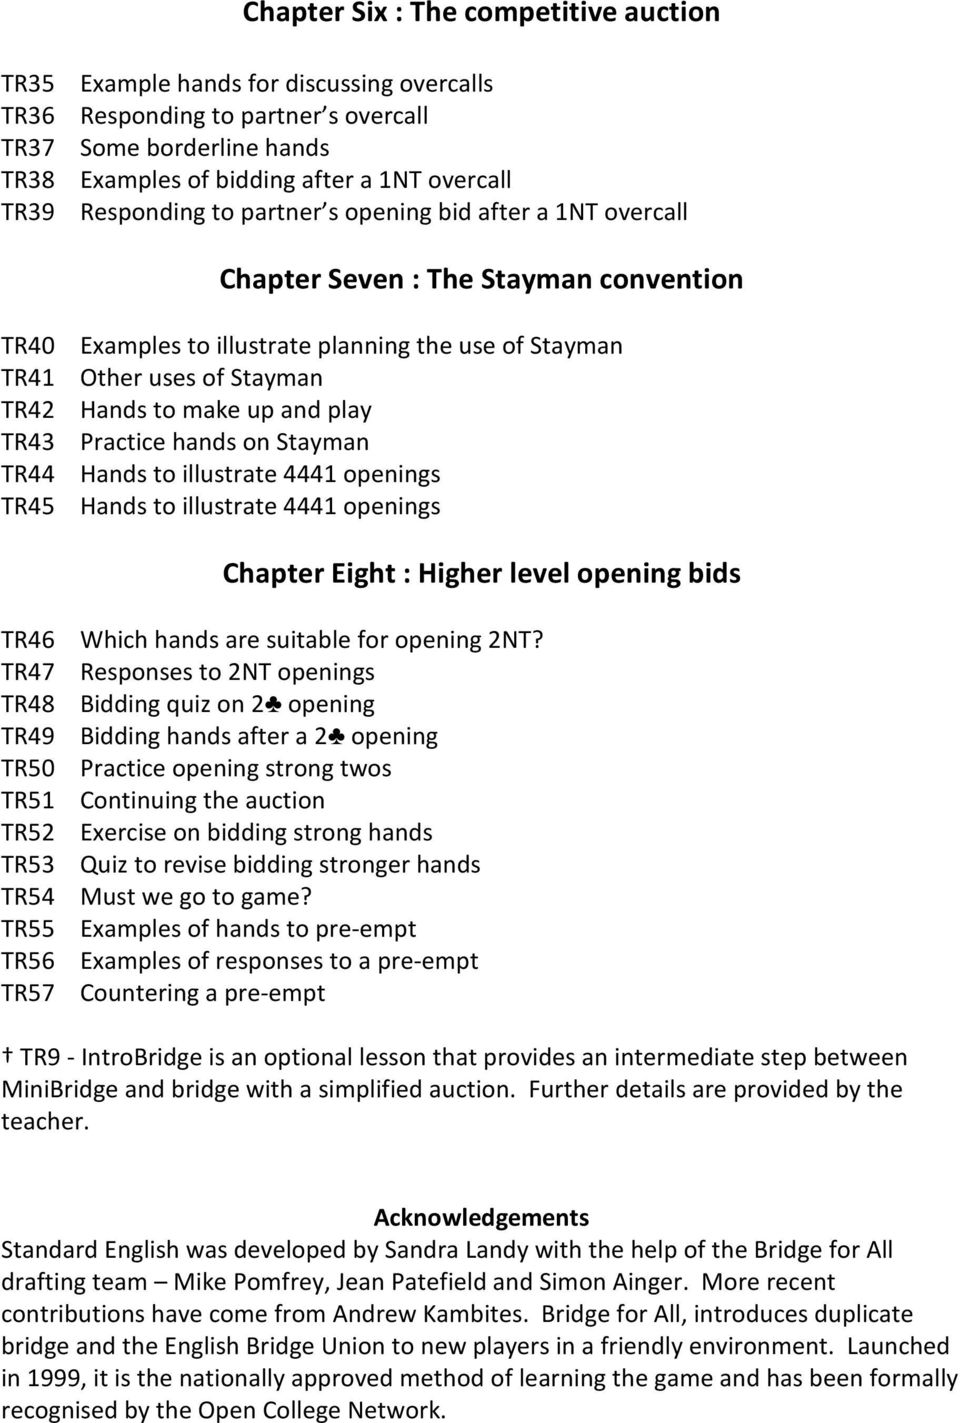 up and play TR43 Practice hands on Stayman TR44 Hands to illustrate 4441 openings TR45 Hands to illustrate 4441 openings Chapter Eight : Higher level opening bids TR46 Which hands are suitable for